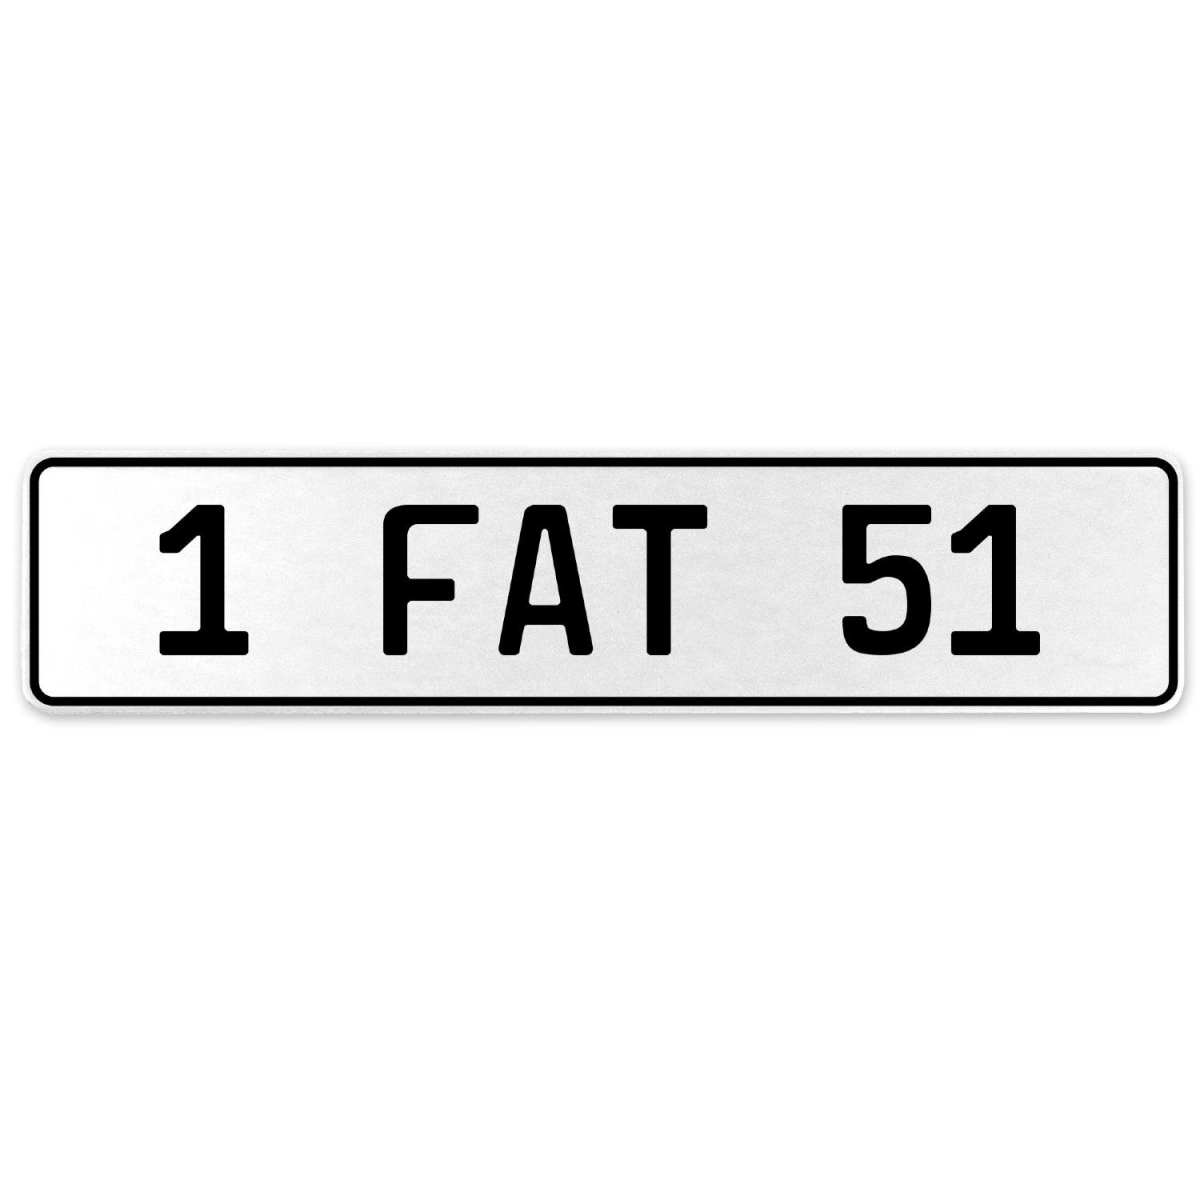 554648 1 Fat 51 - White Aluminum Street Sign Mancave Euro Plate Name Door Sign Wall